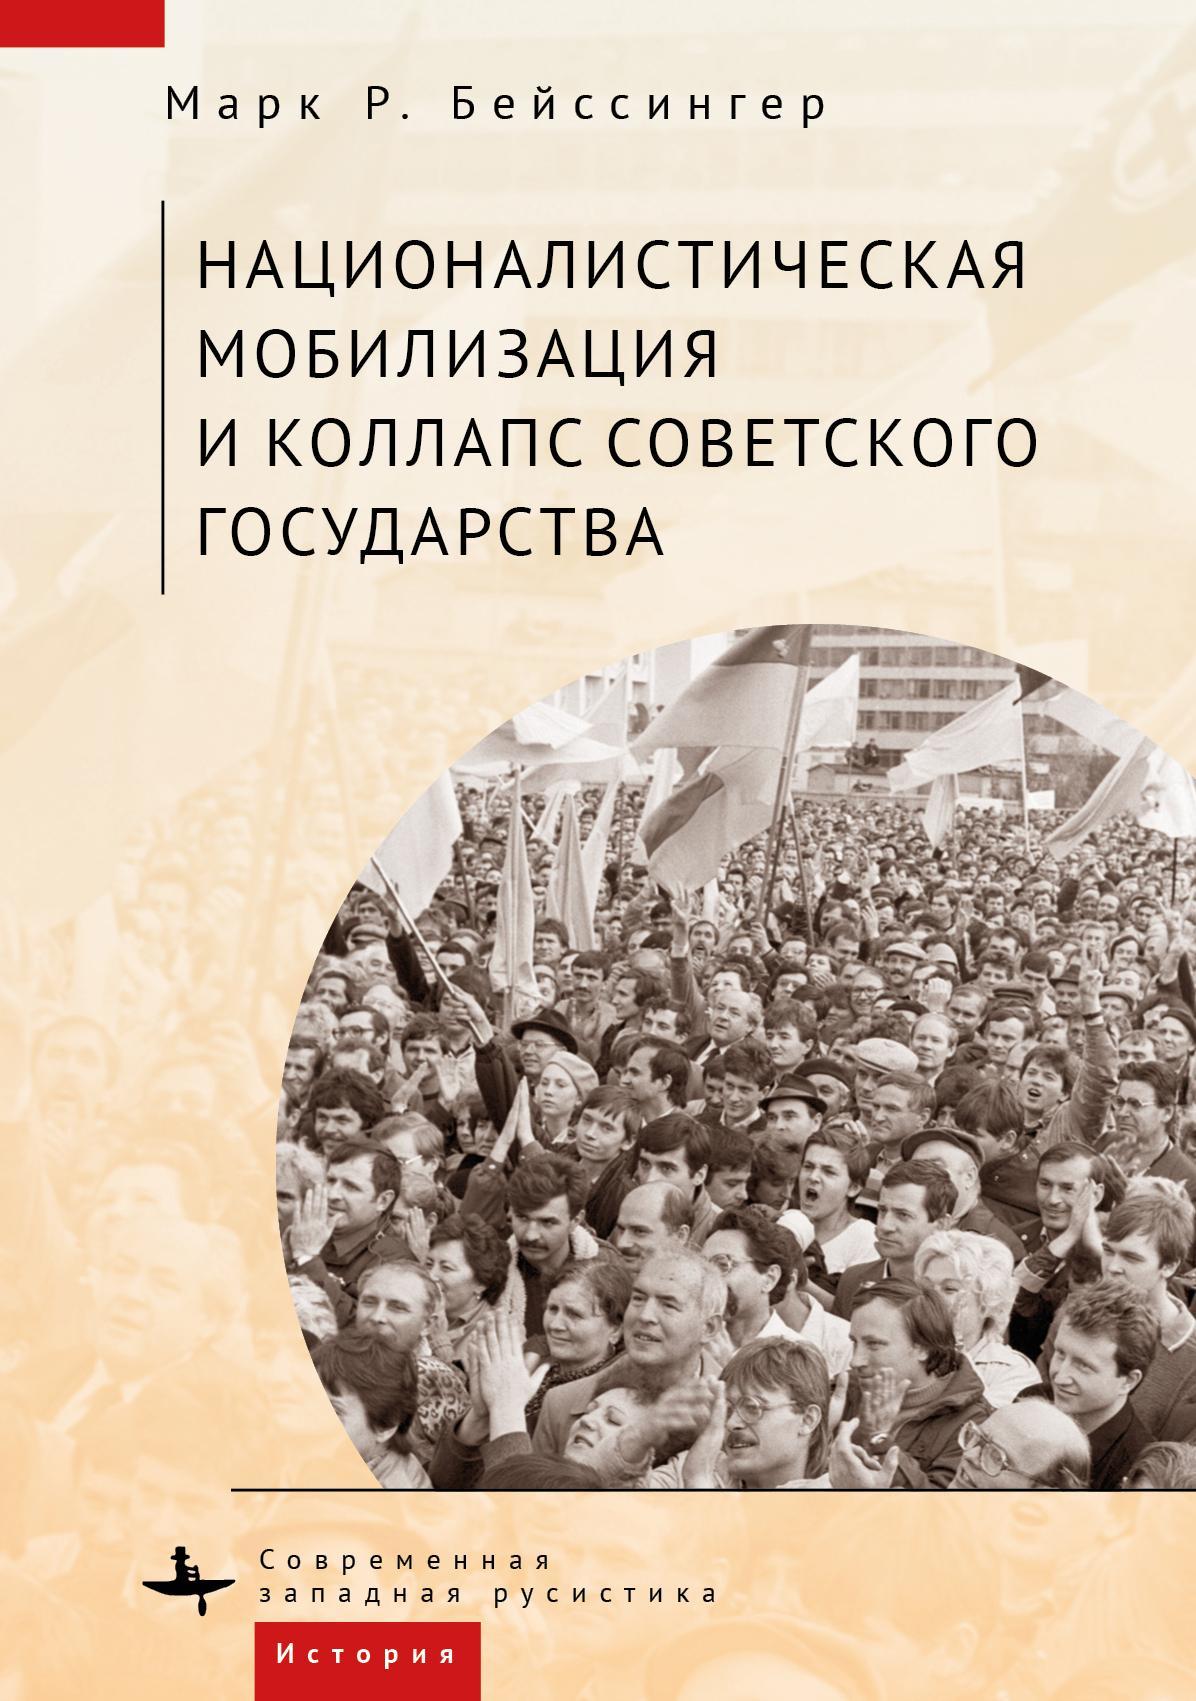 Russian-language version of Nationalist Mobilization and the Collapse of the Soviet State